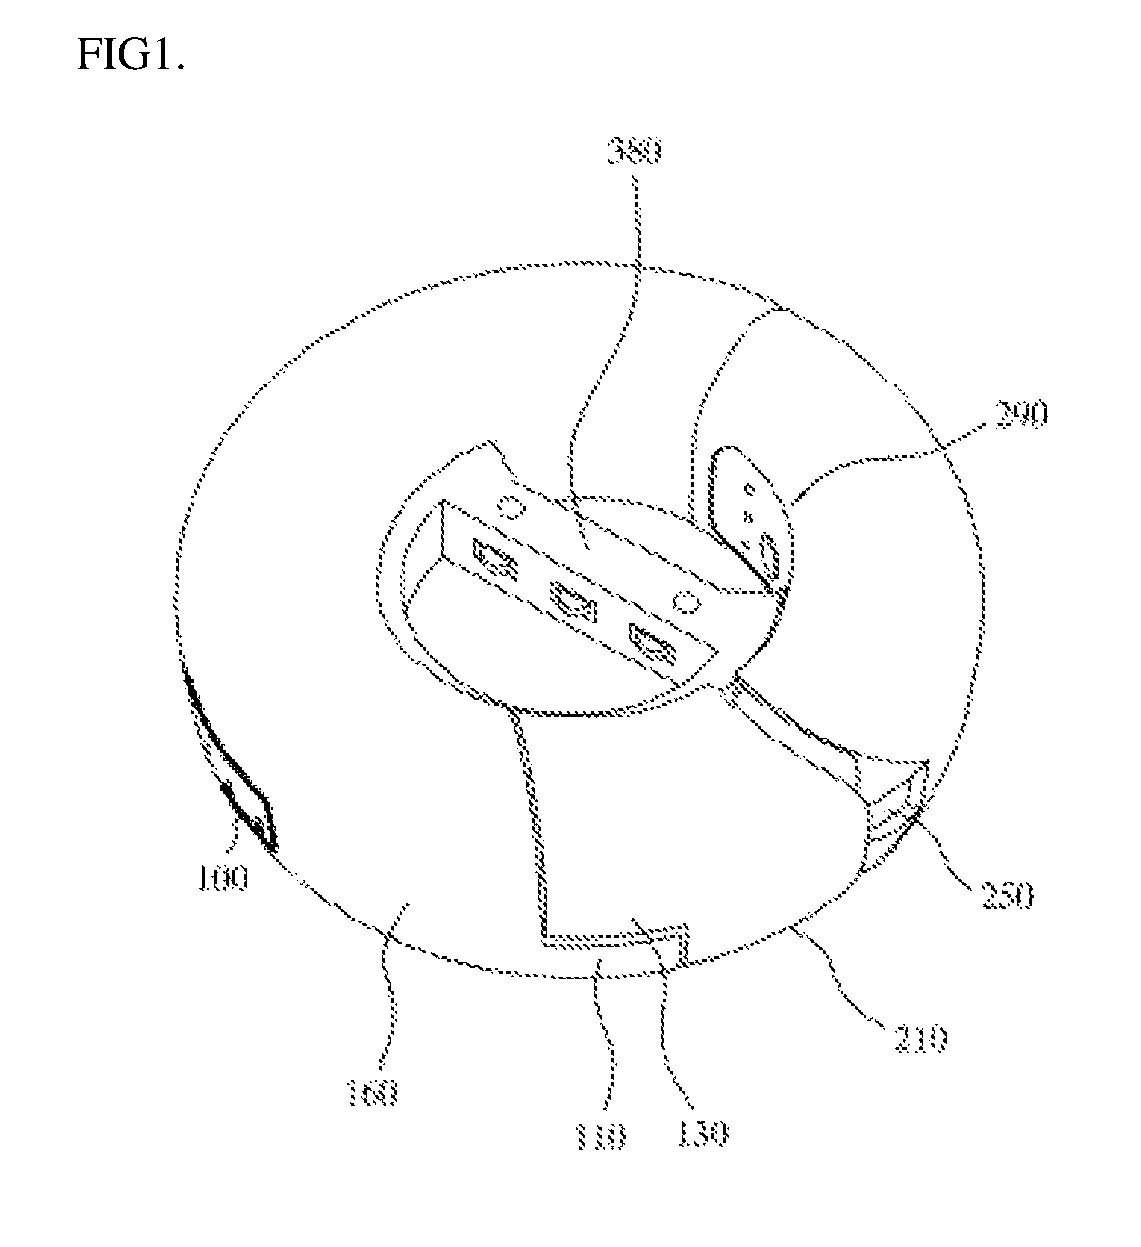 Portable functional apparatus for cleaning vagina